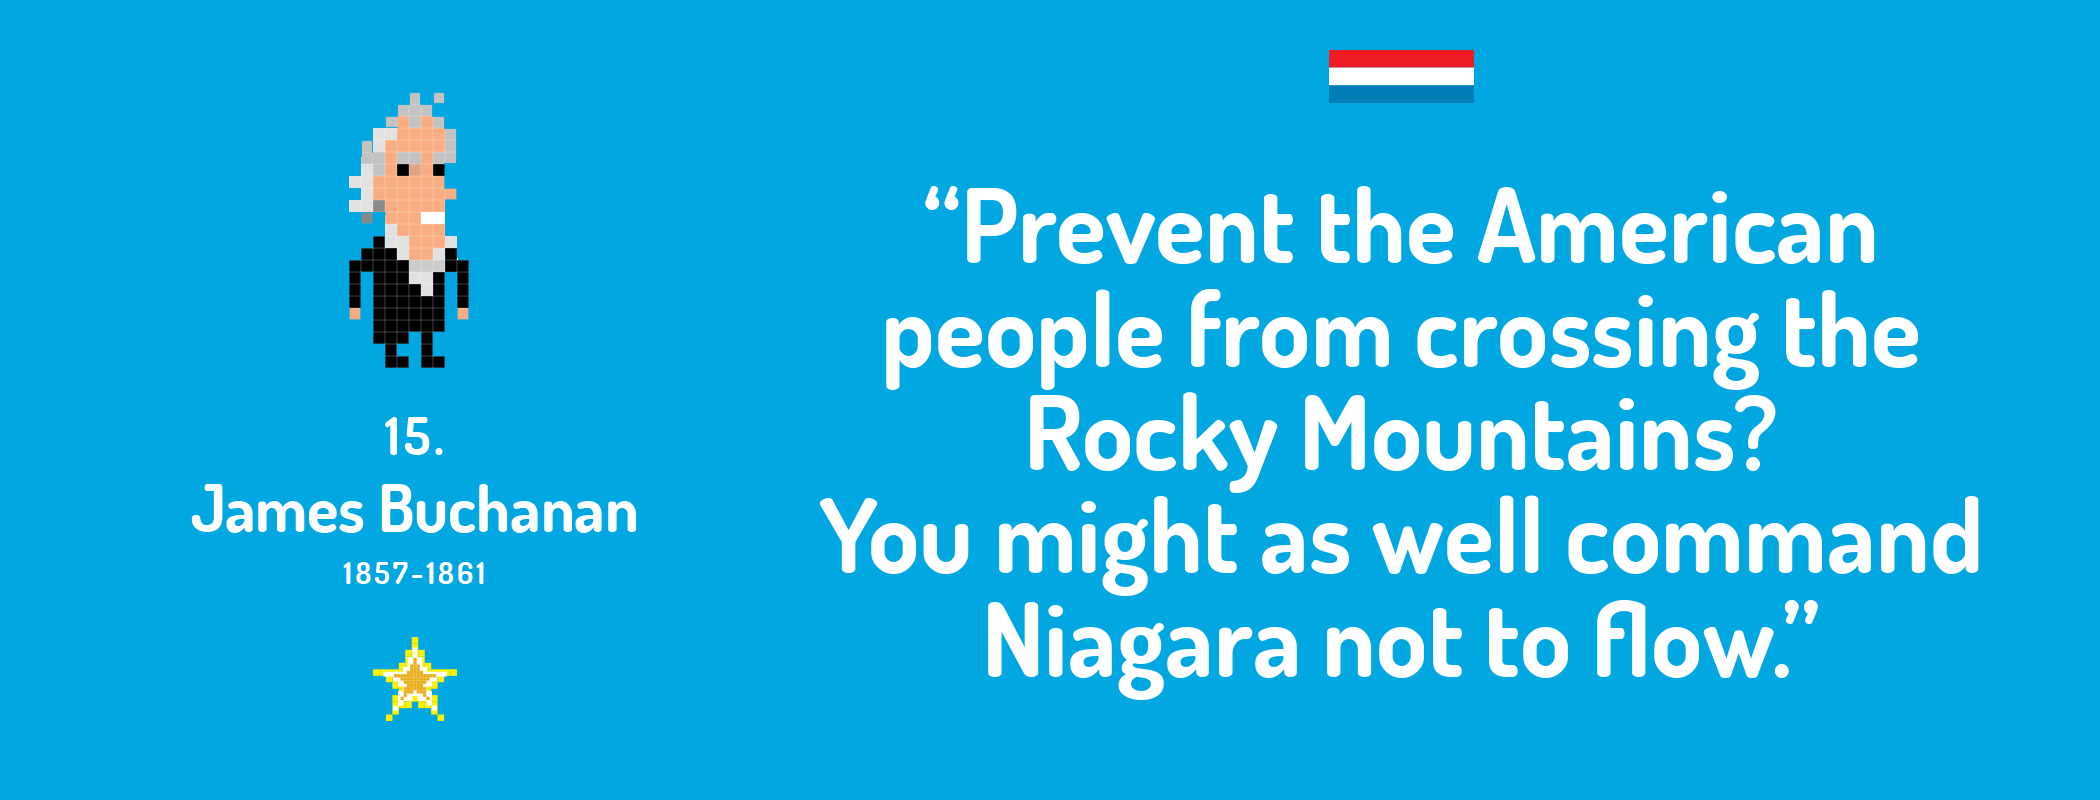 Prevent the American people from crossing the Rocky Mountains? You might as well command Niagara not to flow.